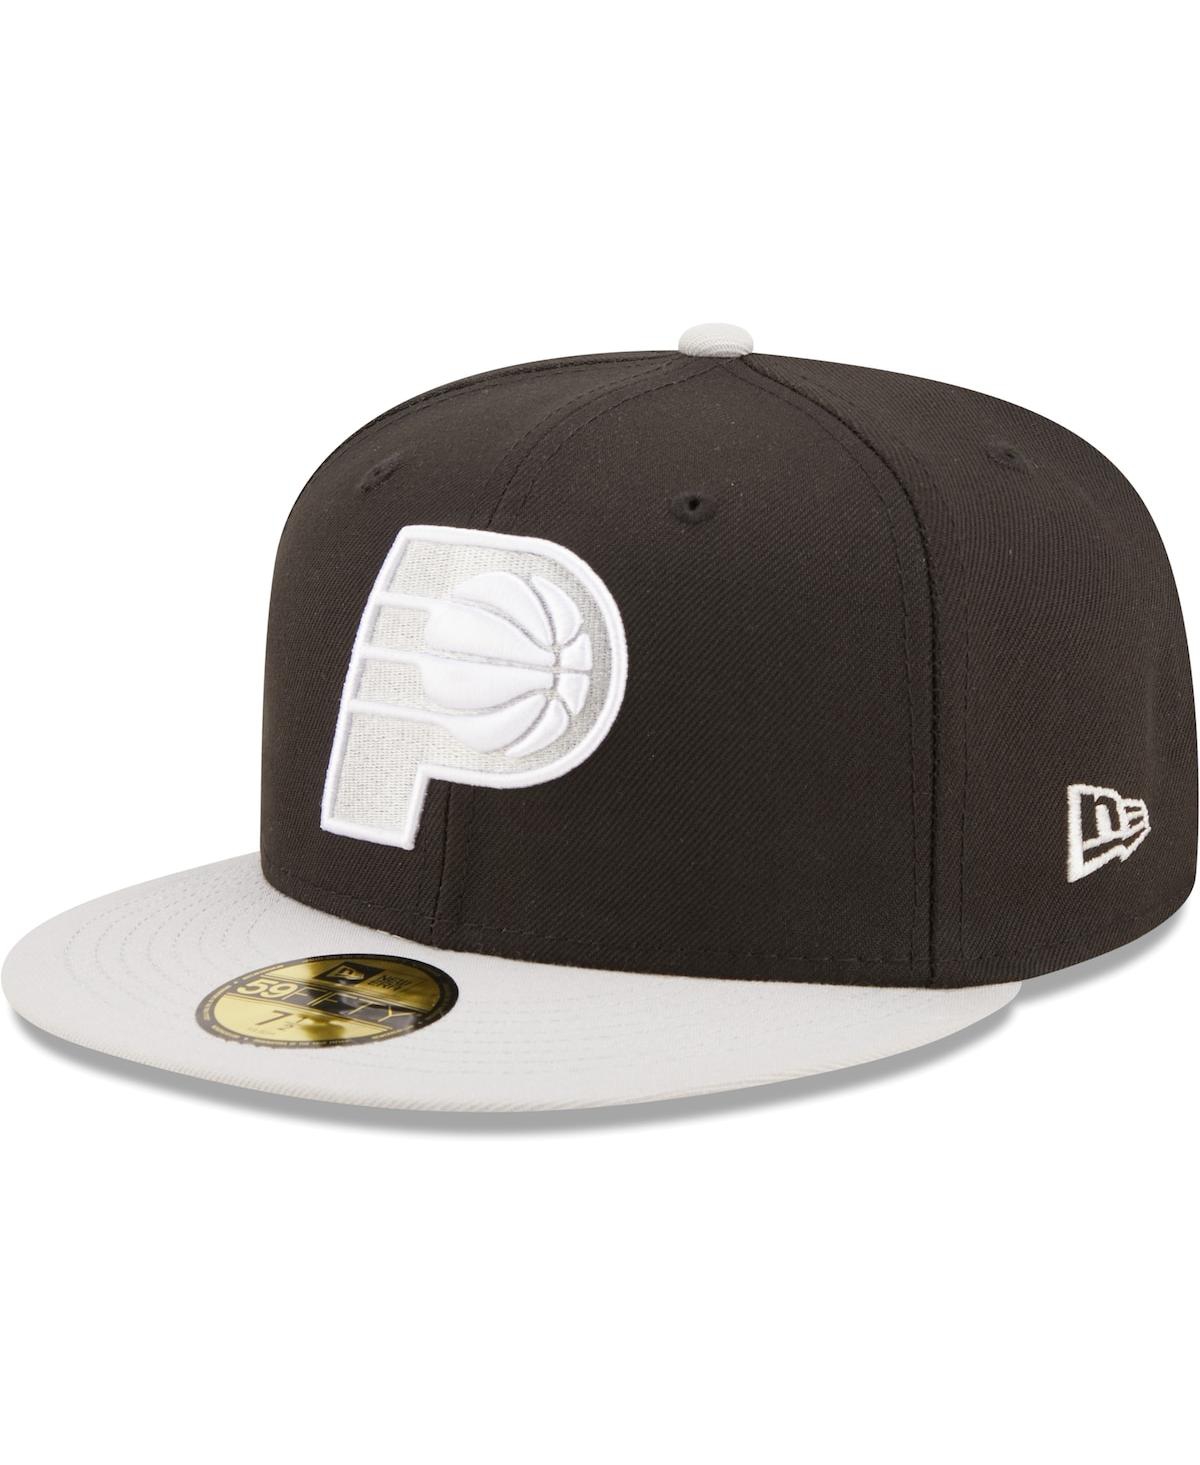 NEW ERA MEN'S NEW ERA BLACK AND GRAY INDIANA PACERS TWO-TONE COLOR PACK 59FIFTY FITTED HAT